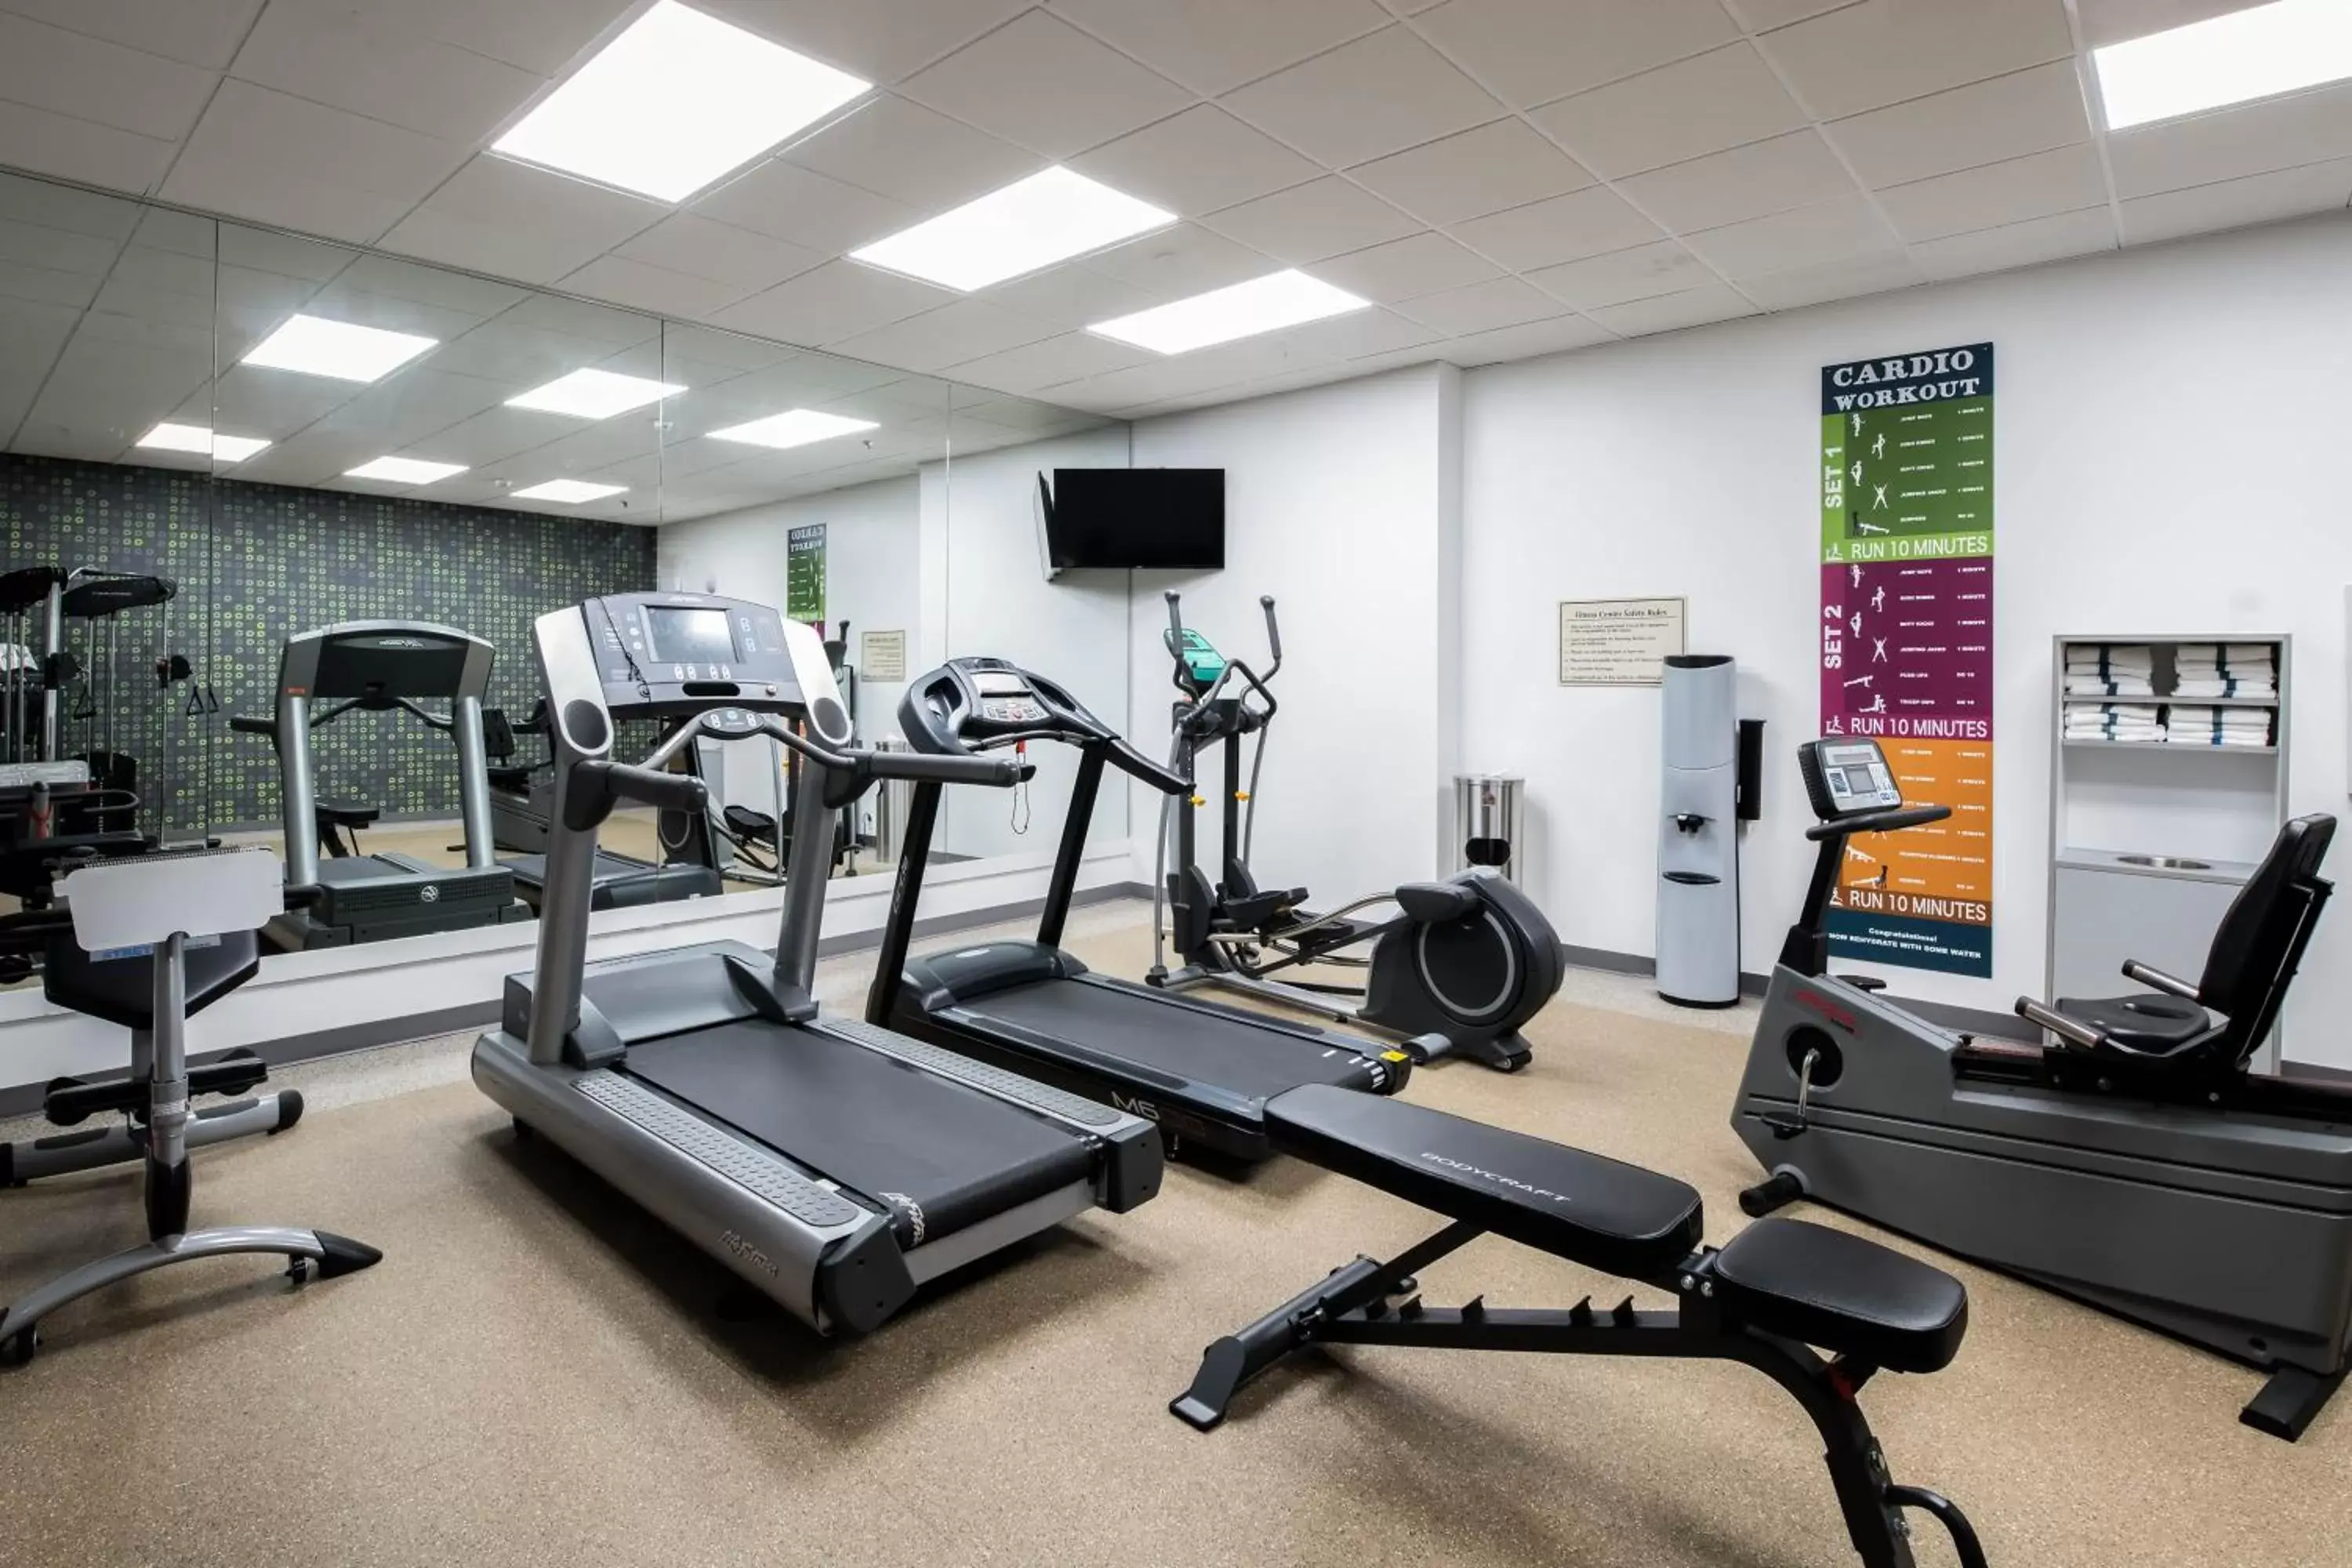 Fitness centre/facilities, Fitness Center/Facilities in Baymont by Wyndham White Plains - Elmsford